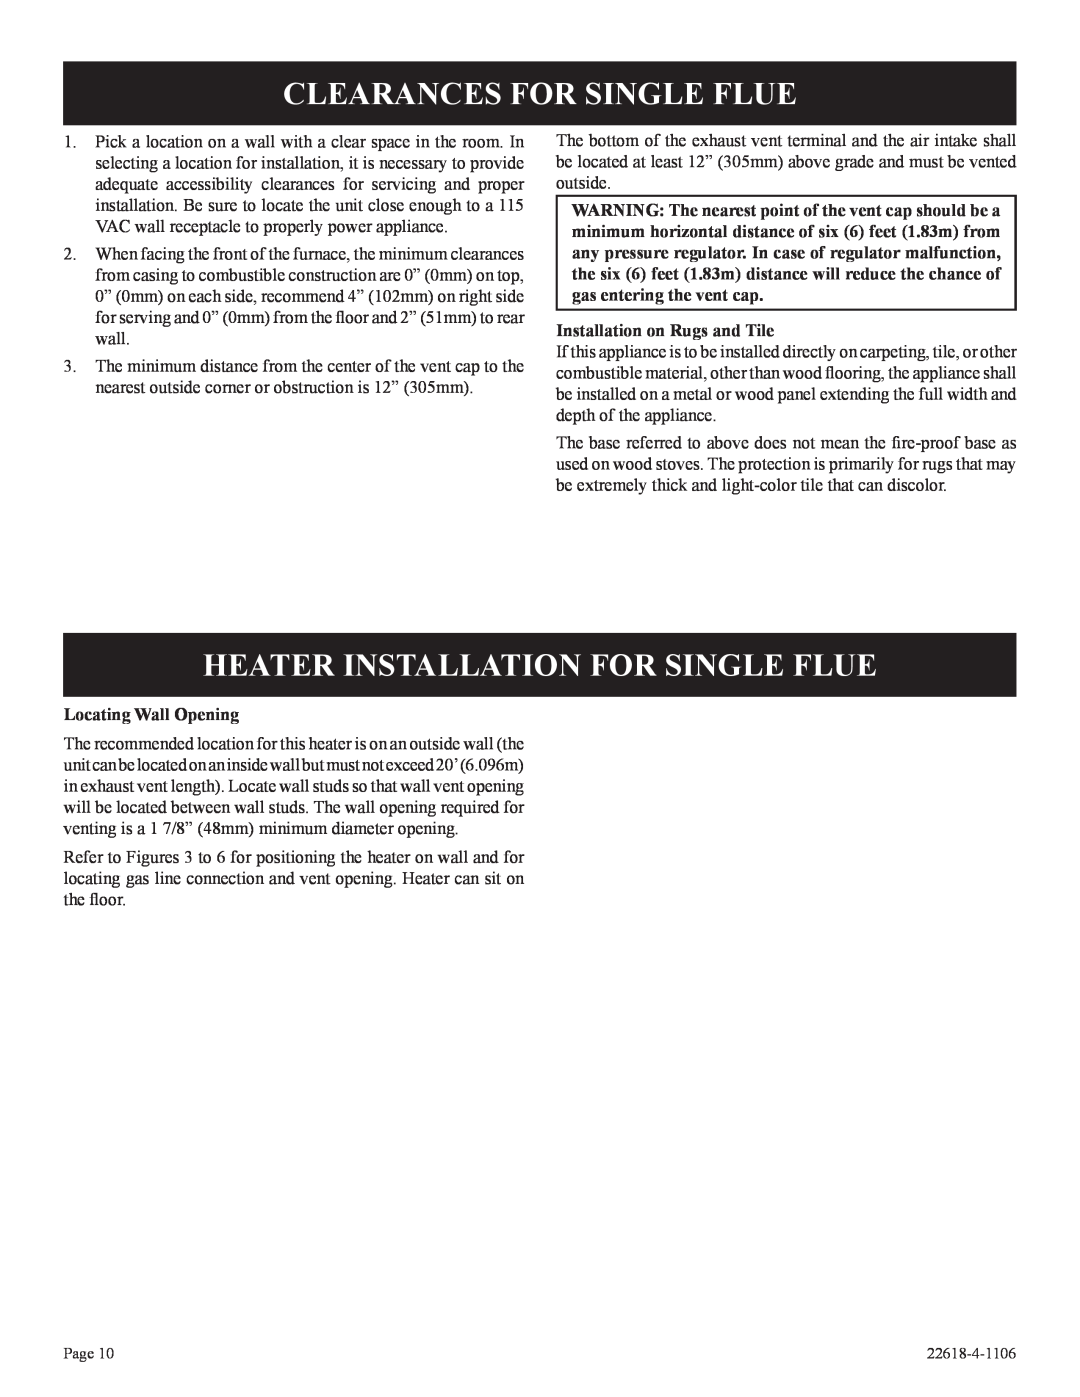 GN National Electric GP)-1 Clearances For Single Flue, Heater Installation For Single Flue, Installation on Rugs and Tile 